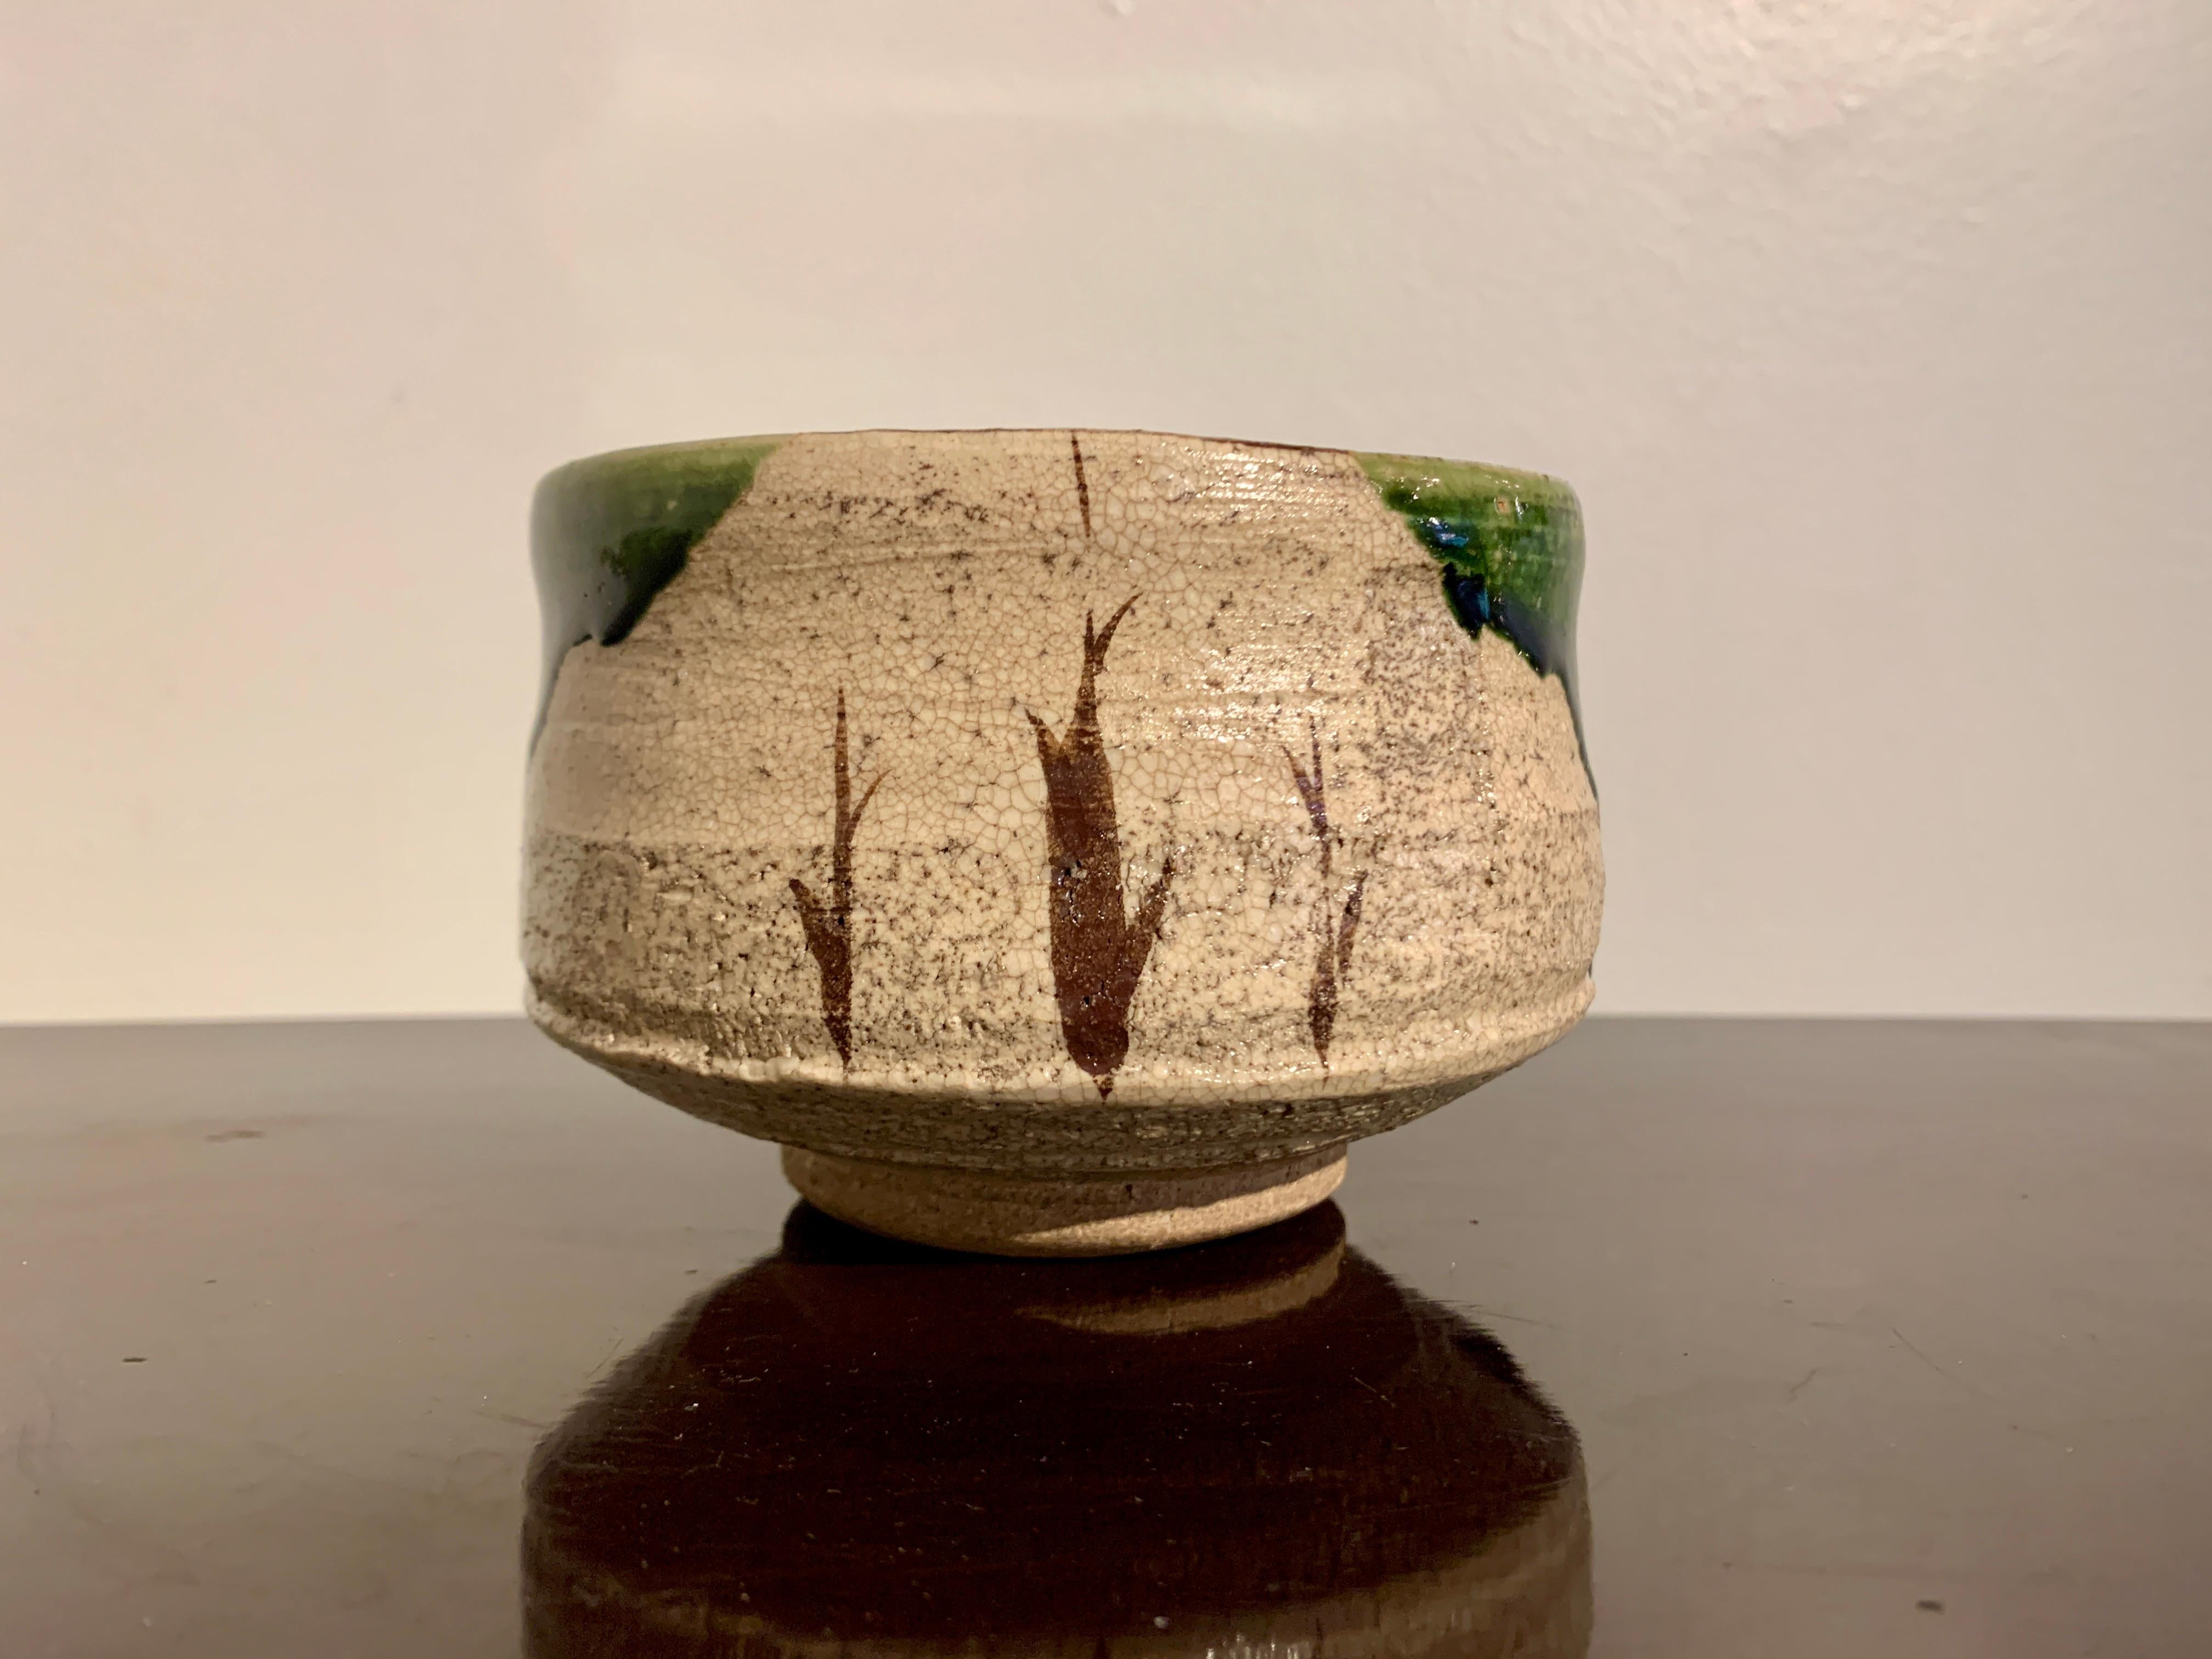 A charming vintage Japanese oribe glazed chawan by Matsumoto Tetsuzan (b. 1955), Seto, Japan. 

The tea bowl, called a chawan, wonderfully potted with a high sides and a deep well. The buff colored stoneware glazed in the typical ao-oribe fashion,